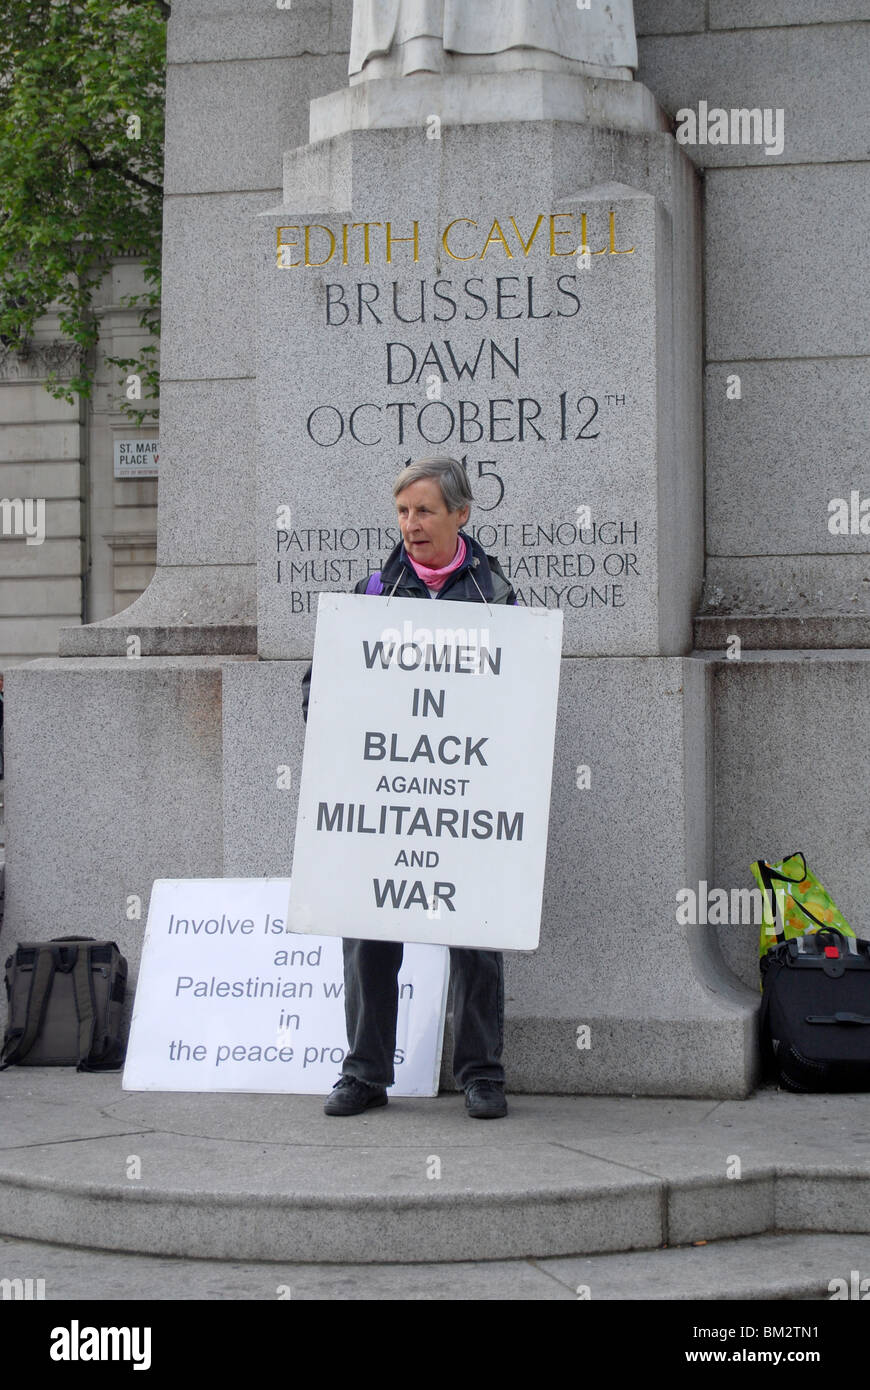 Women in Black against Militarism and War protesters Stock Photo